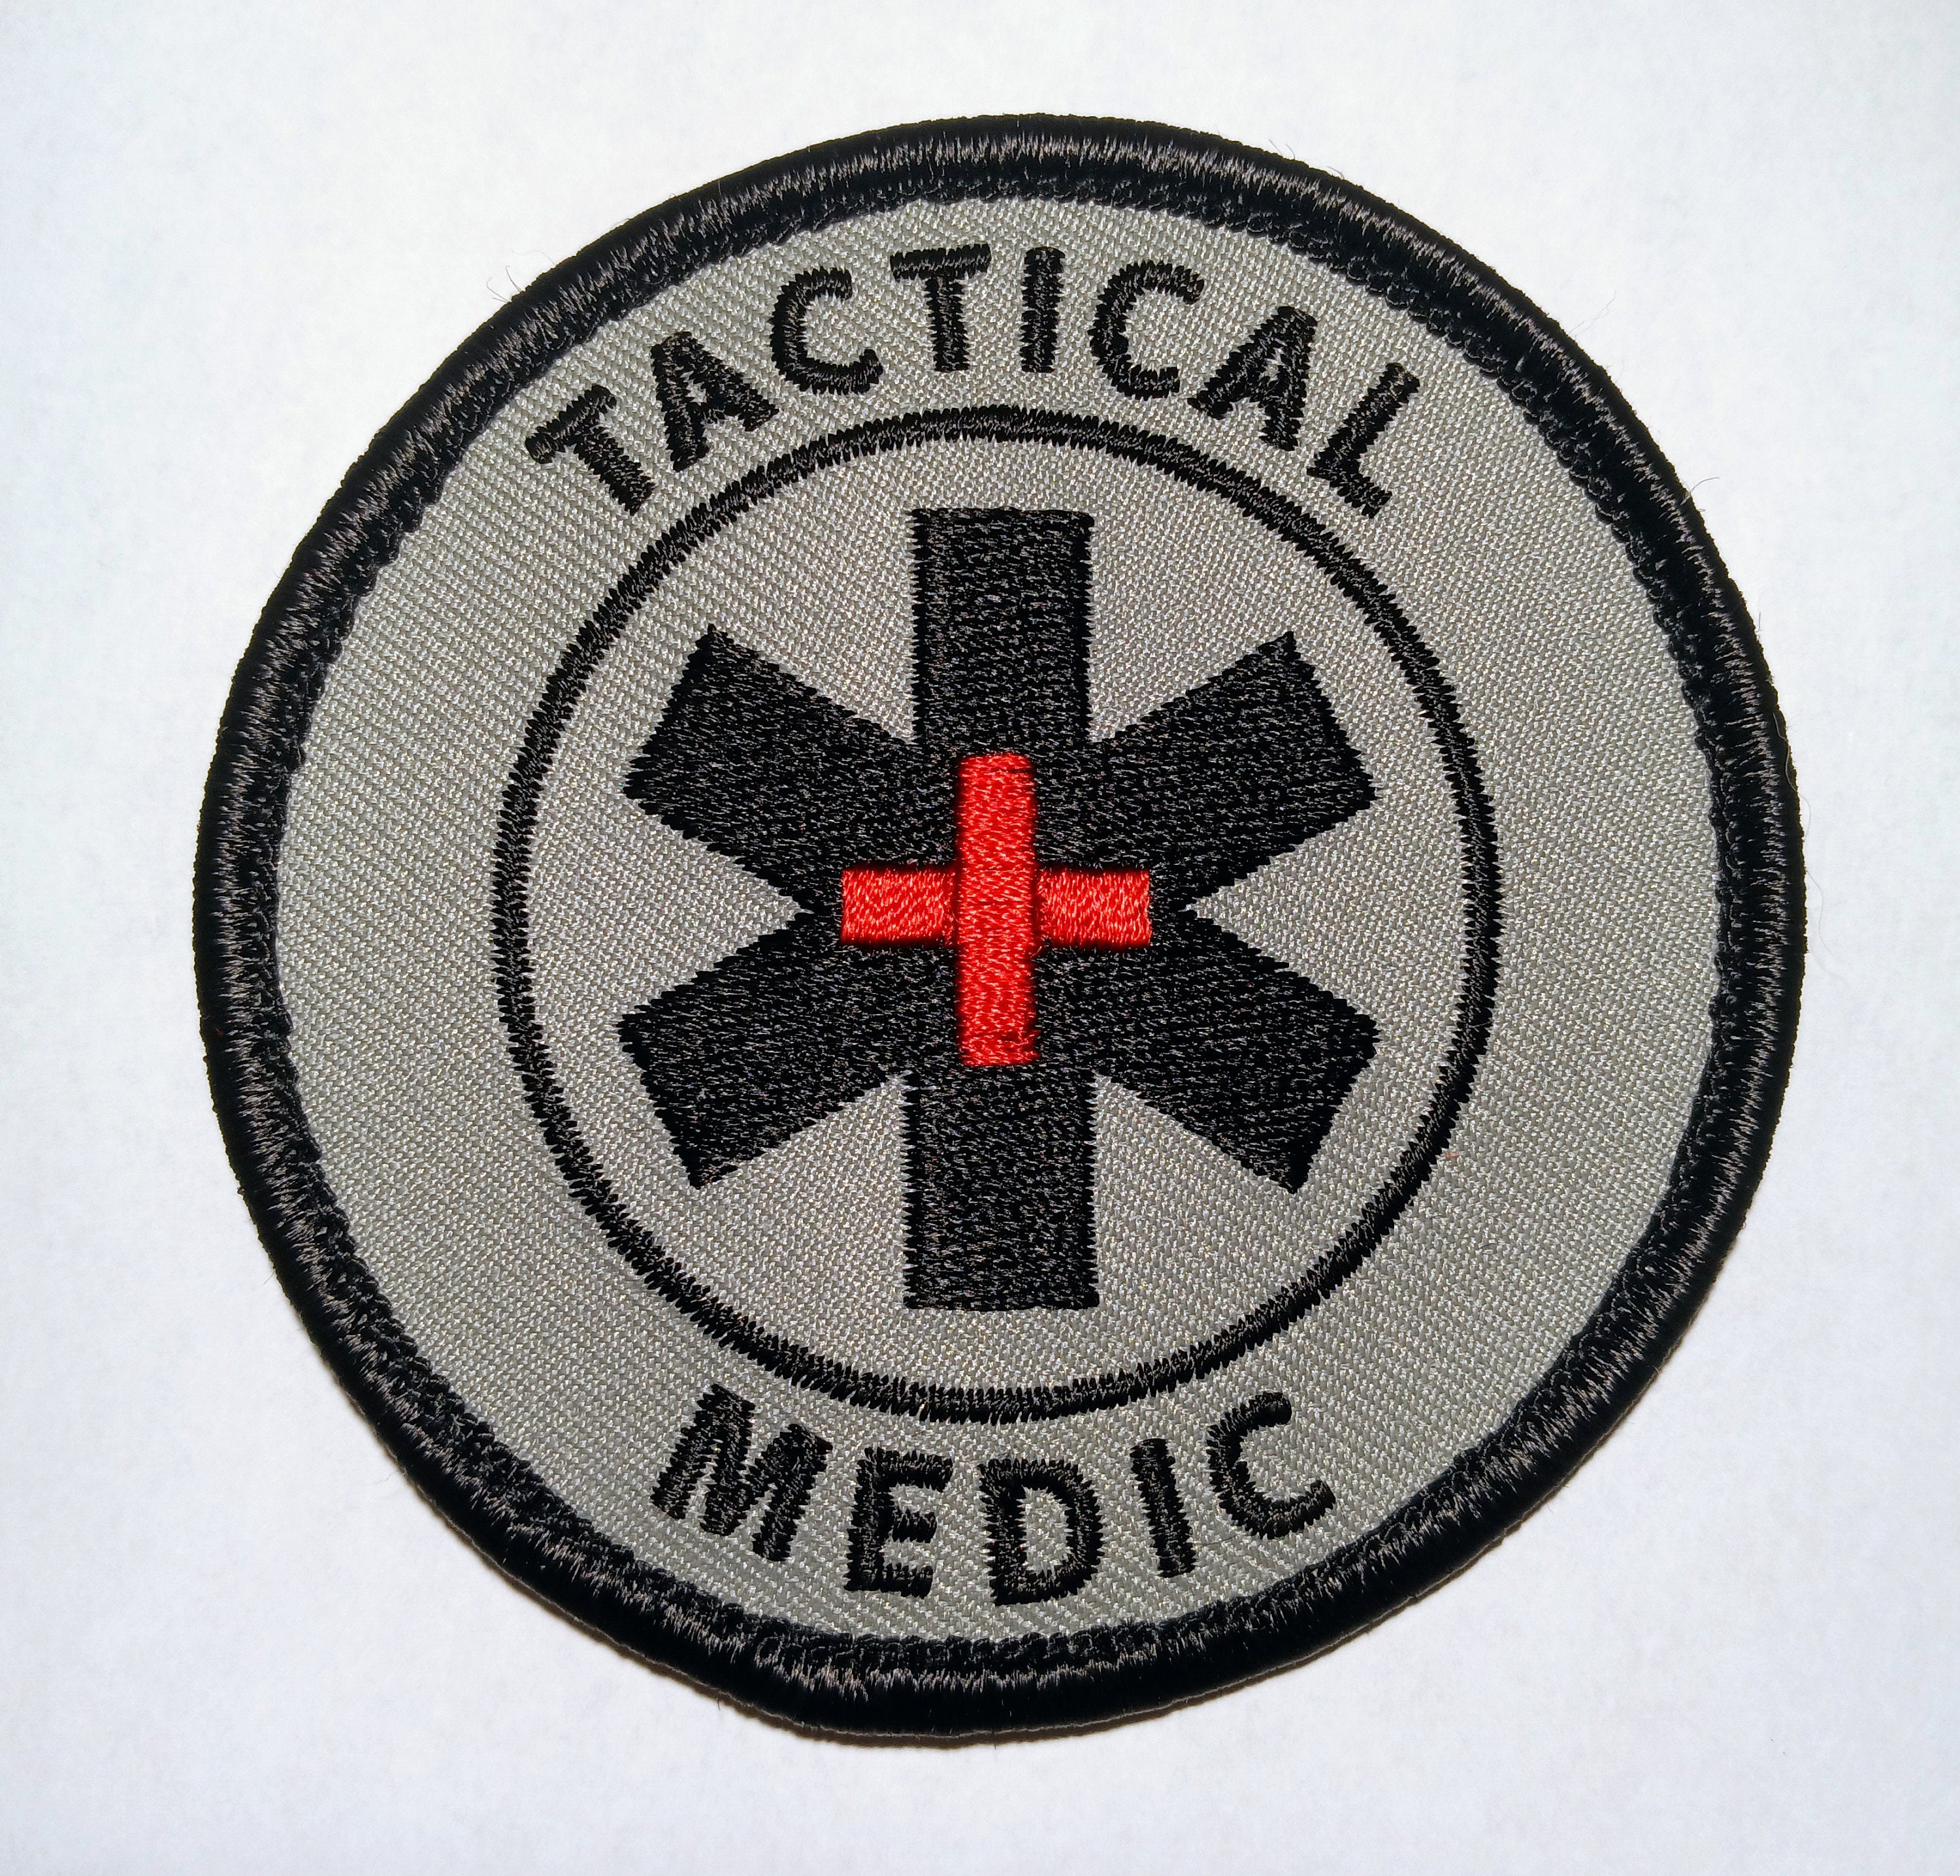 Tactical Medic 3 Hook & Loop Patch - Police - Fire - EMS - Rescue - Airsoft